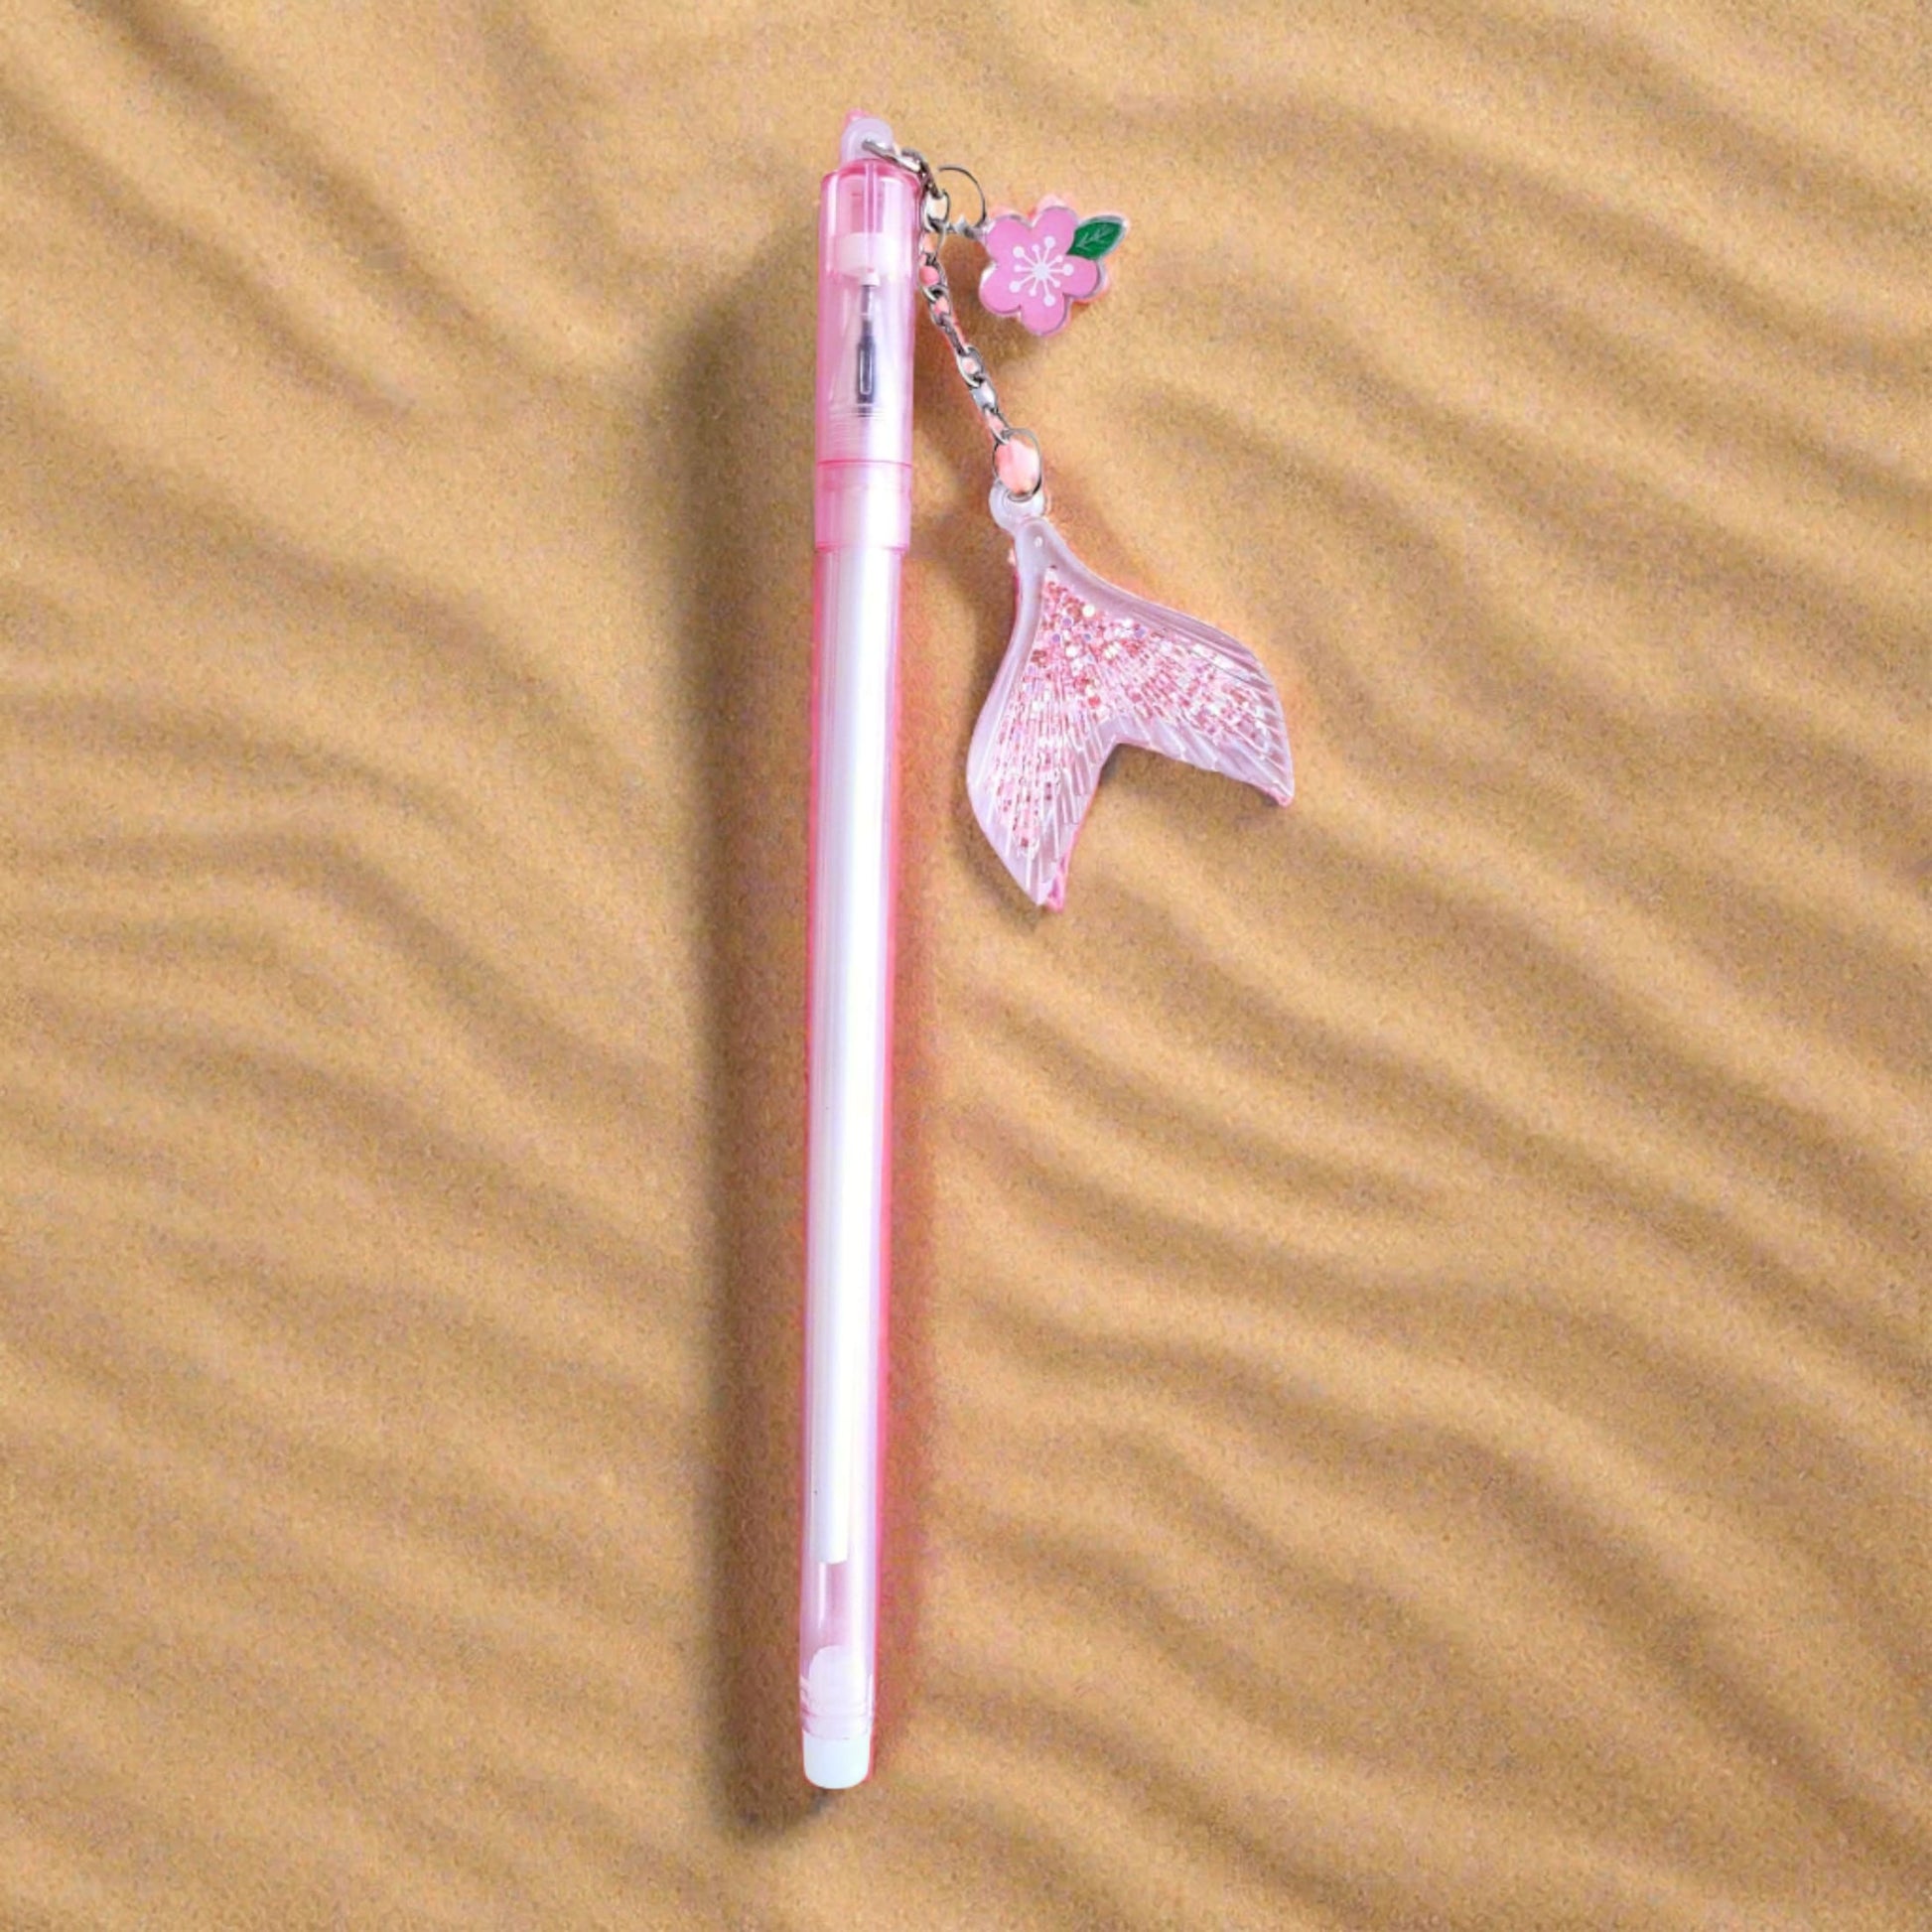 Mermaid Tail Charm Gel Pen from Confetti Kitty, Only 1.49